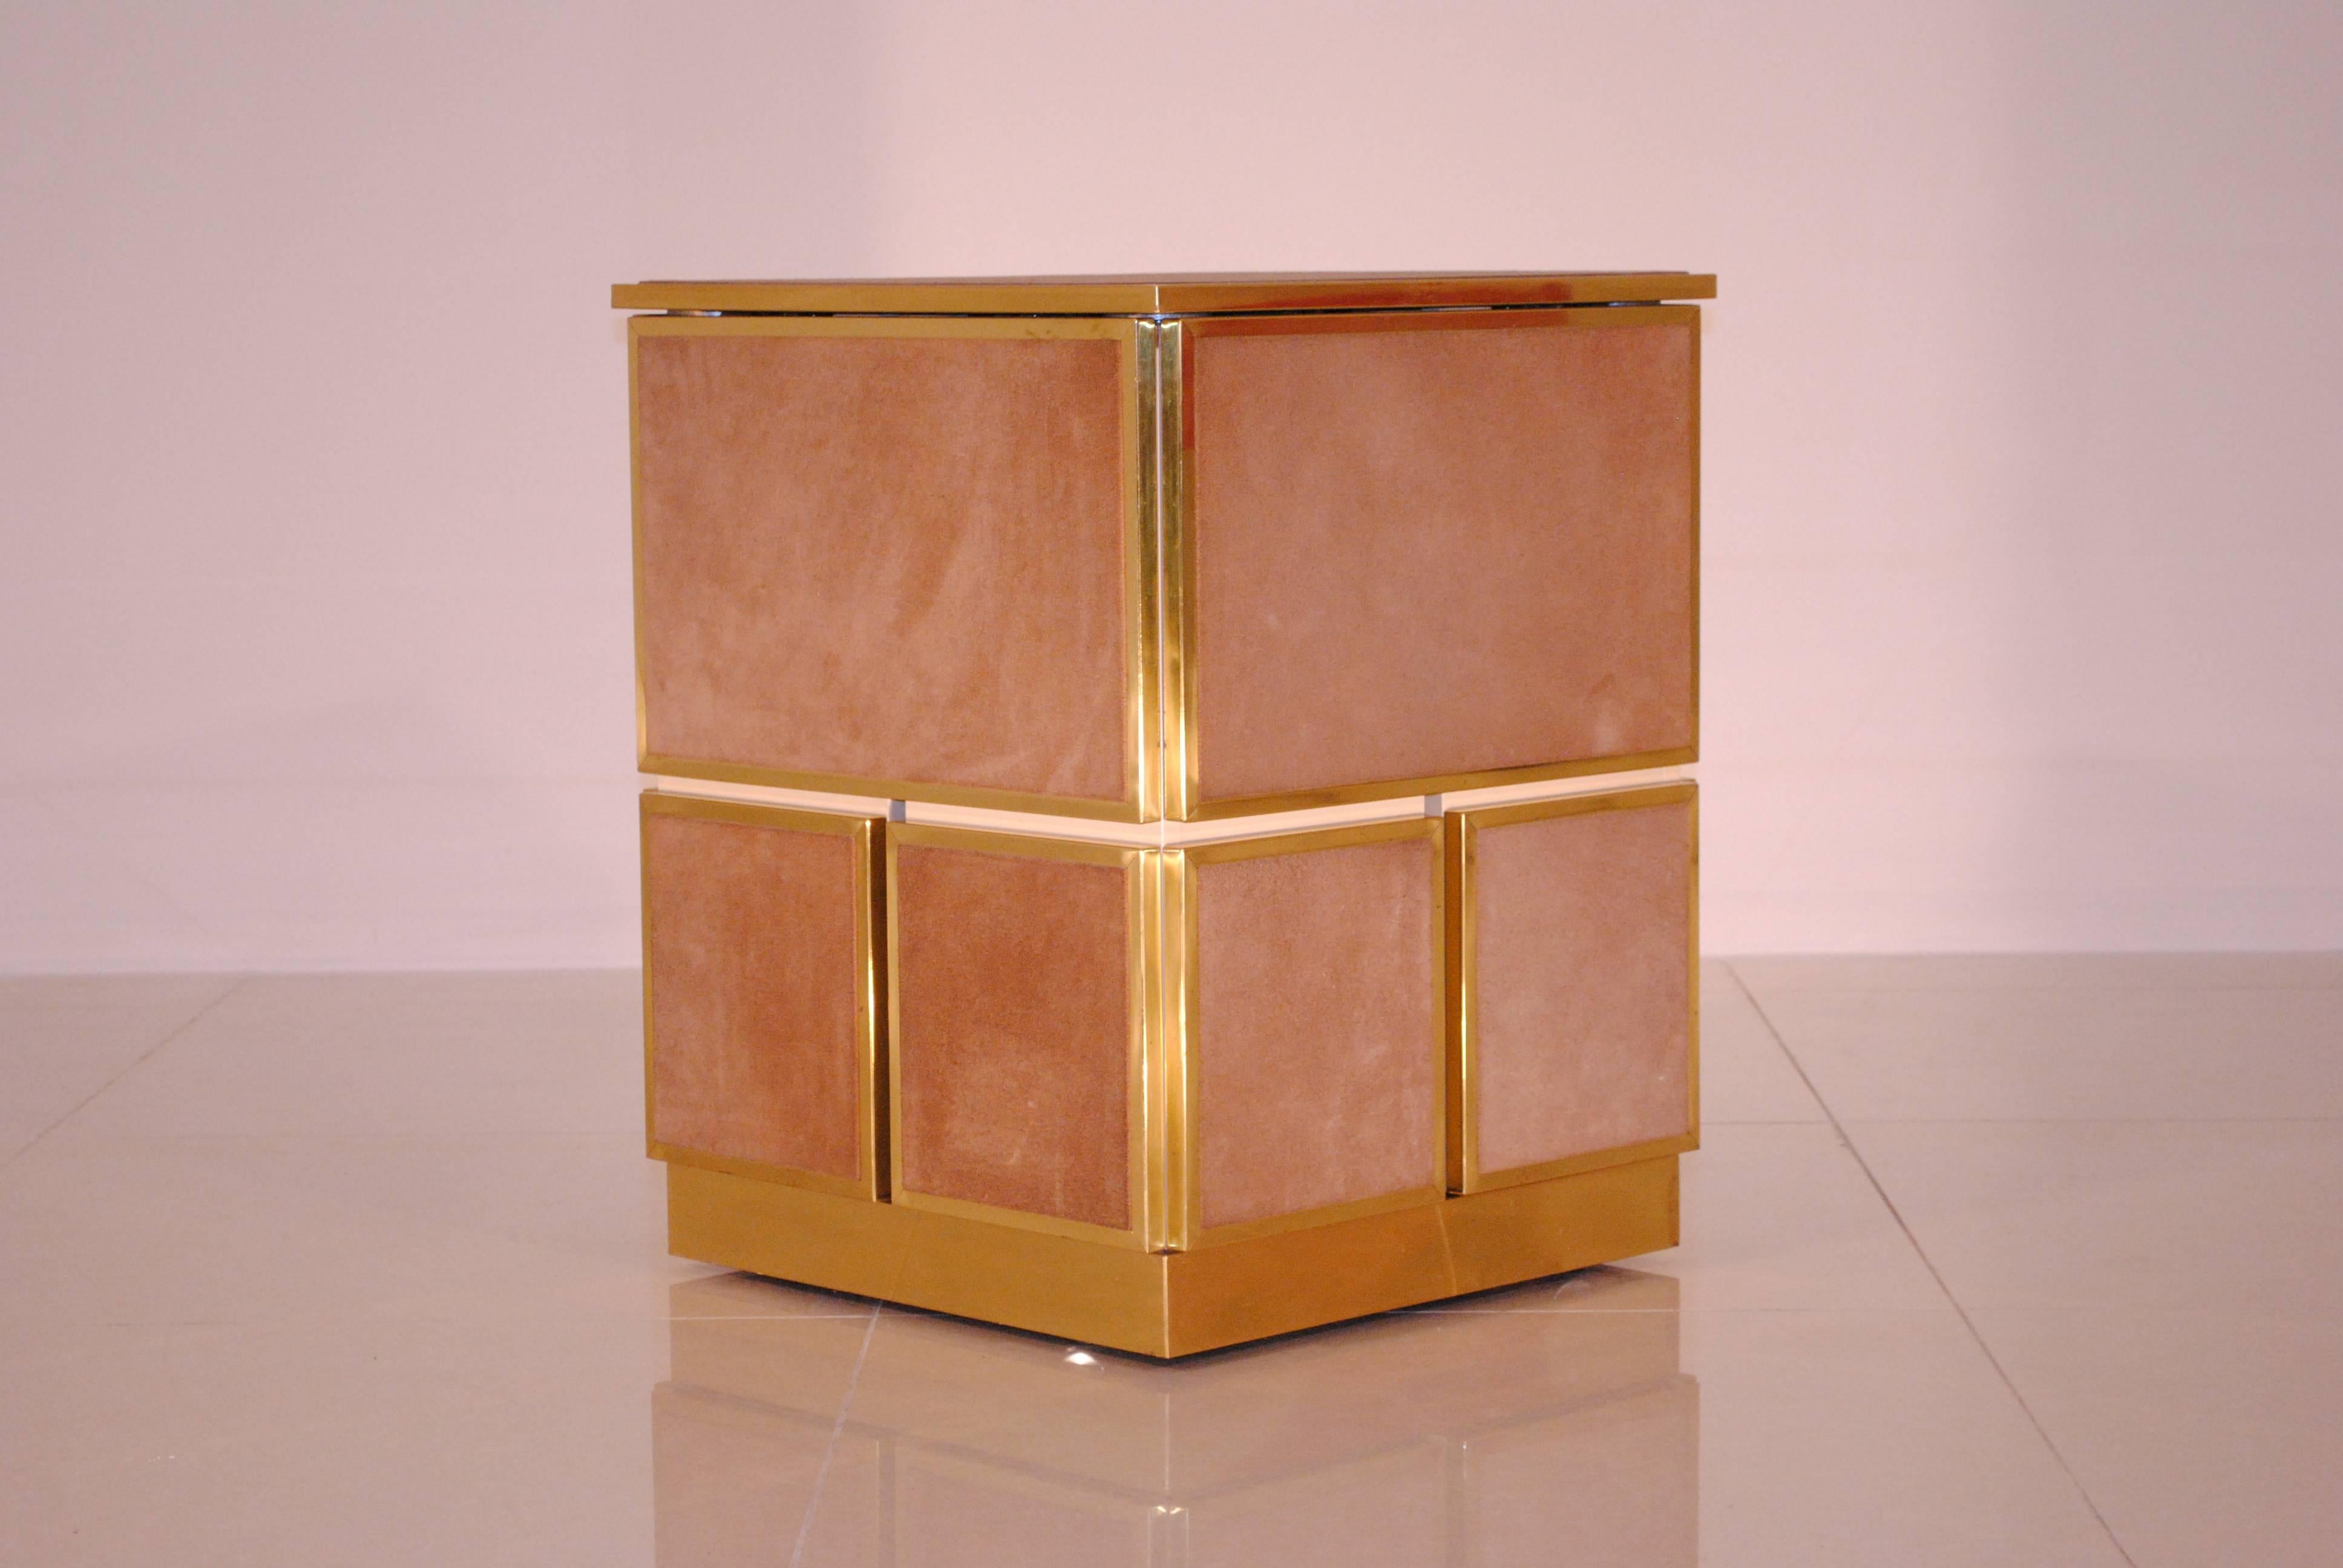 This 'Cubo' folds open and becomes an ingenious games or card table. Design by Renato Meneghetti and made by DDD design, Italy, circa 1976.
High quality materials as lacquered wood, solid brass and sans colors natural Suède.

A great decorative